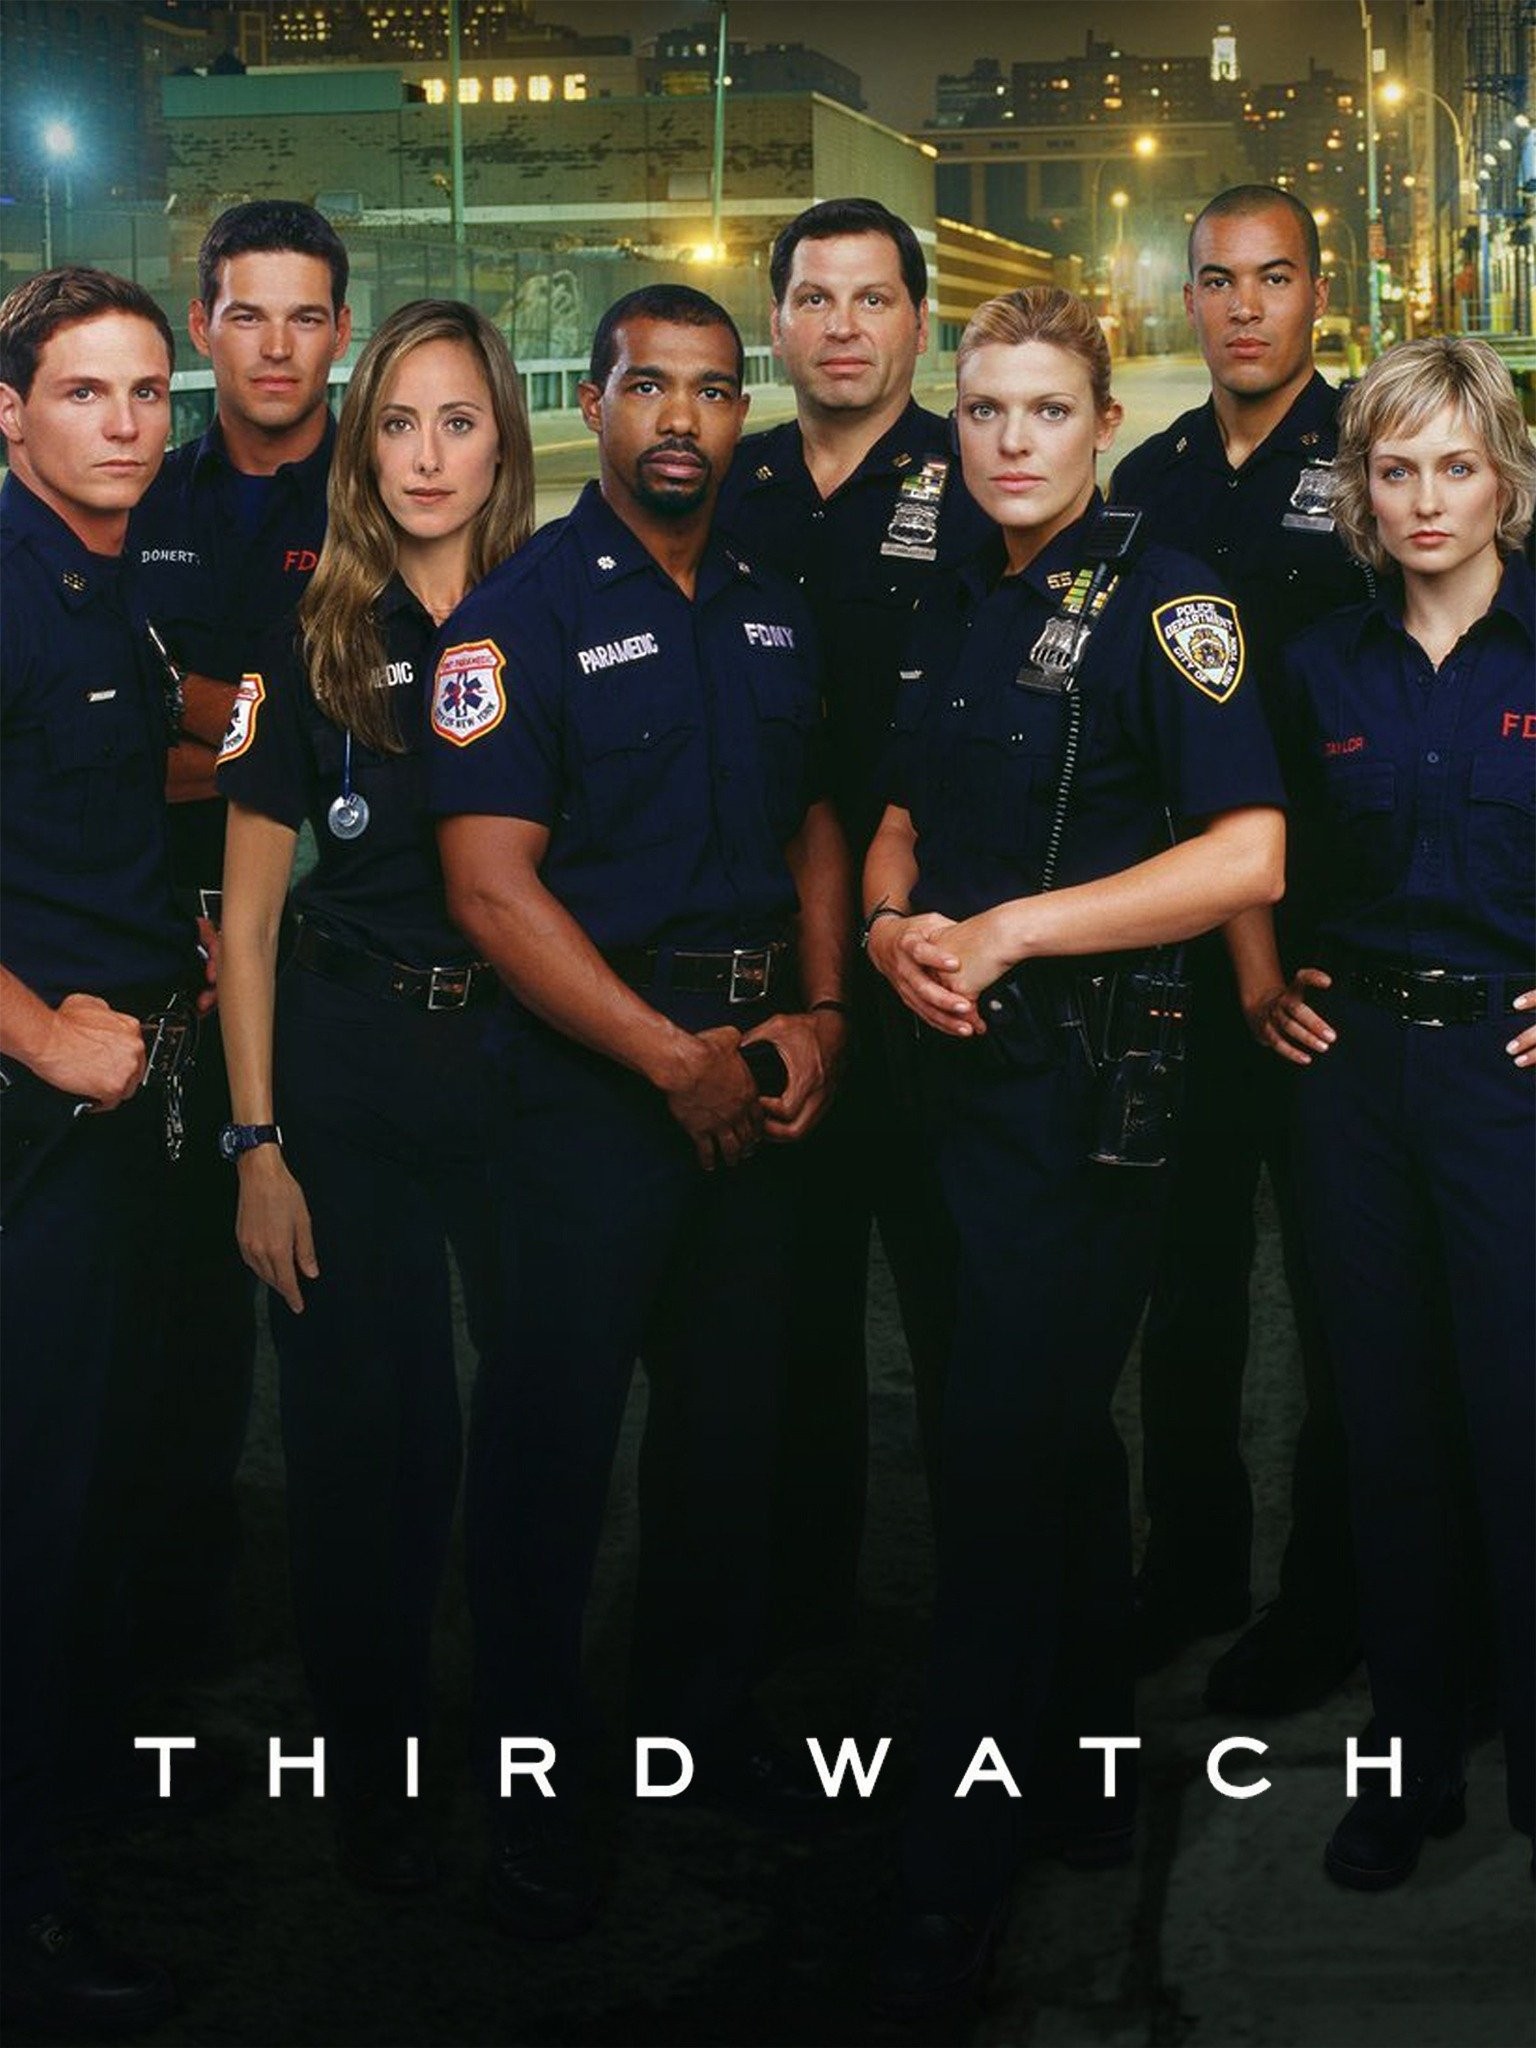 The Hollywood Show - Come meet Third Watch and Beverly Hills 90210 star  Jason Wiles at the upcoming Hollywood Show in Los Angeles on November 1-2!  For more information and to purchase